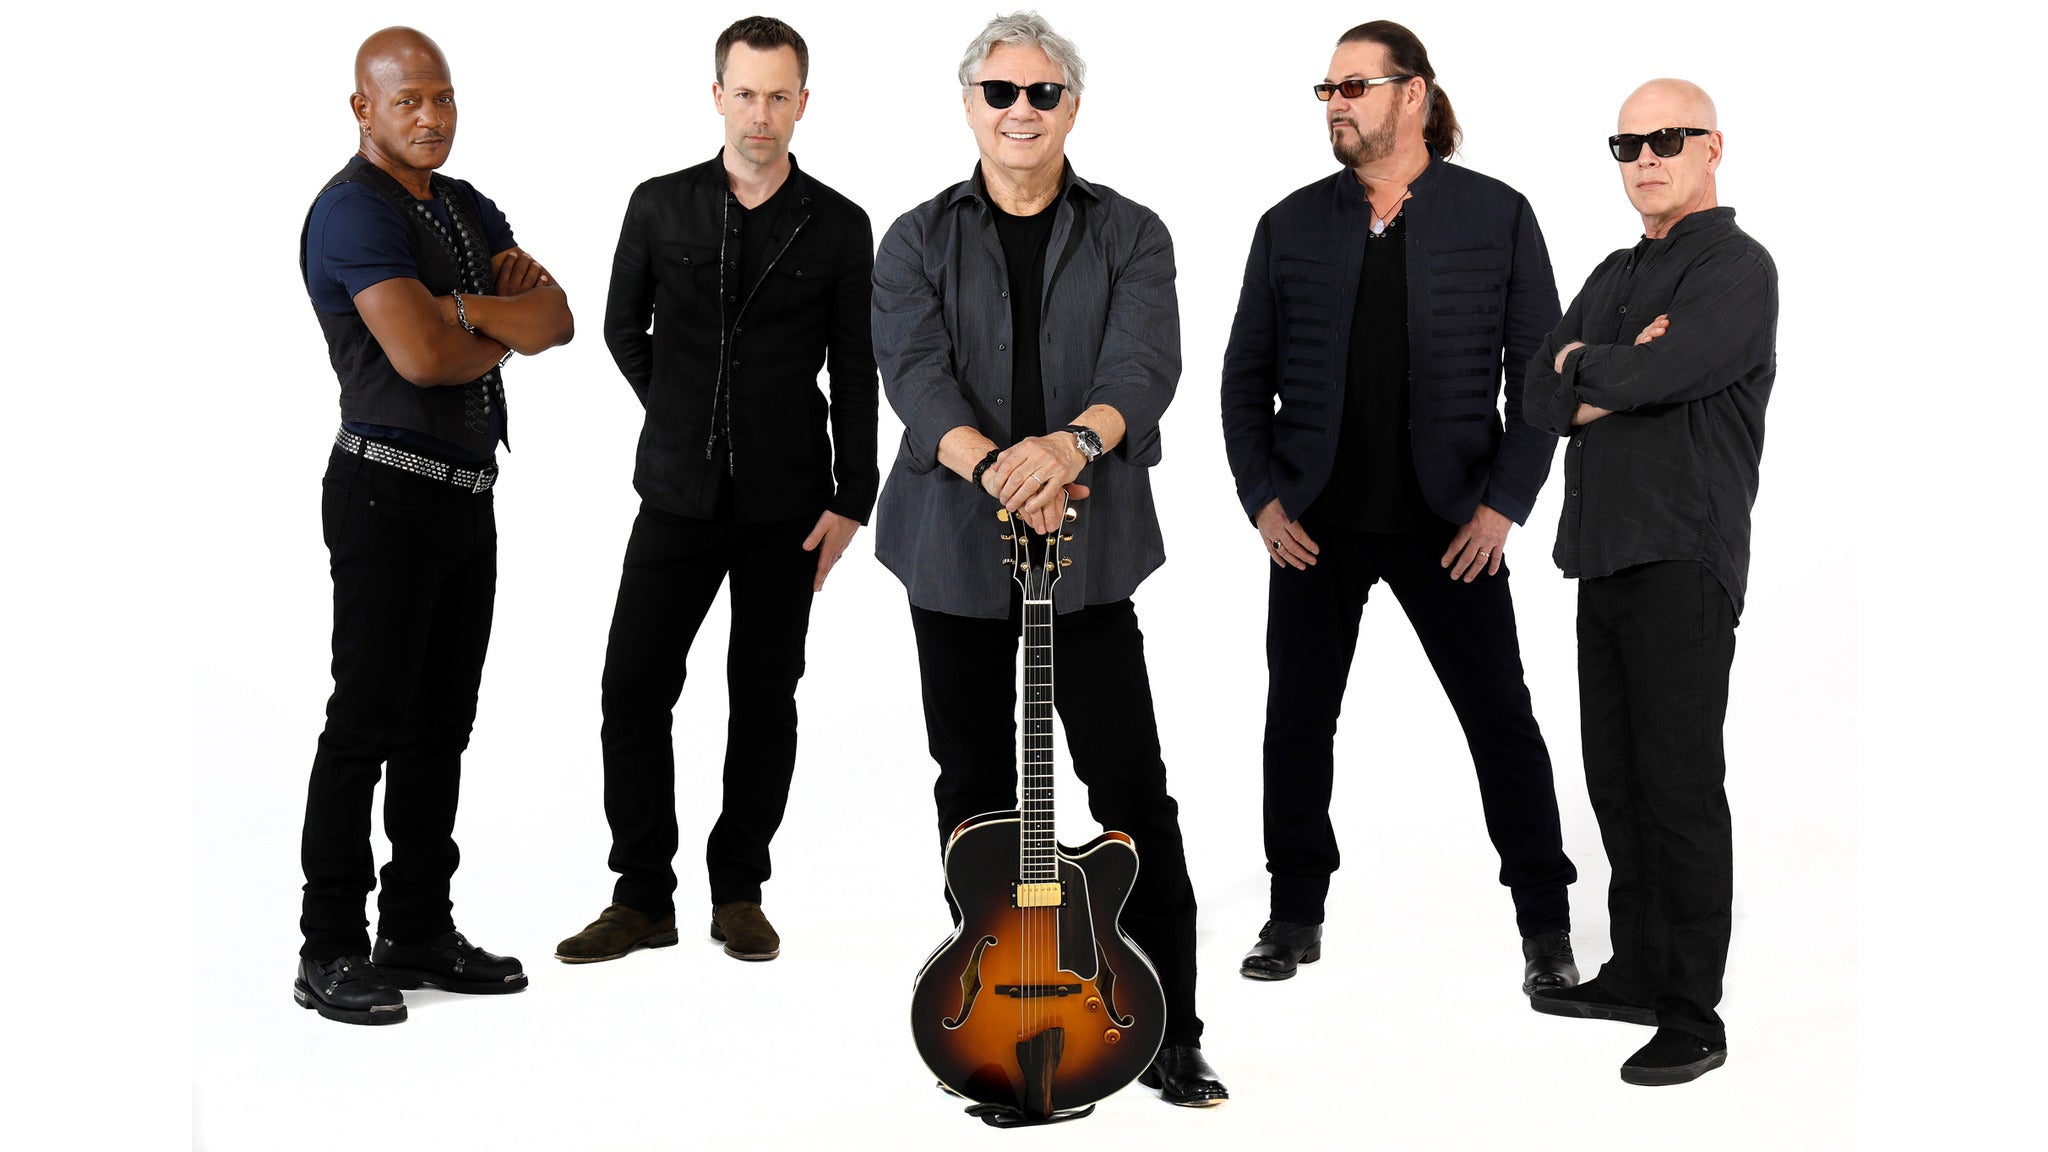 Steve Miller Band pre-sale password for advance tickets in Dallas